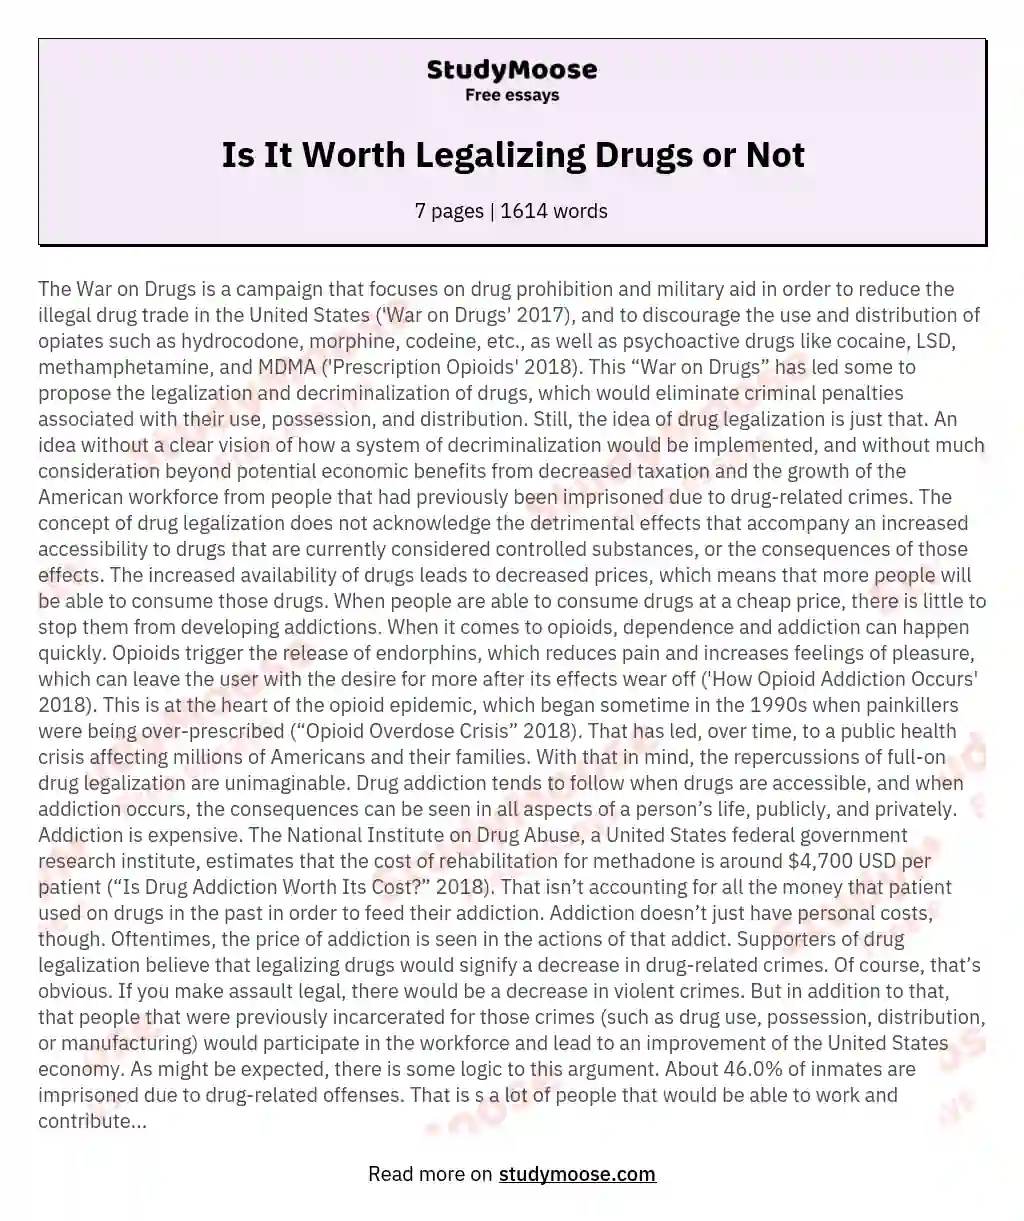 Is It Worth Legalizing Drugs or Not essay